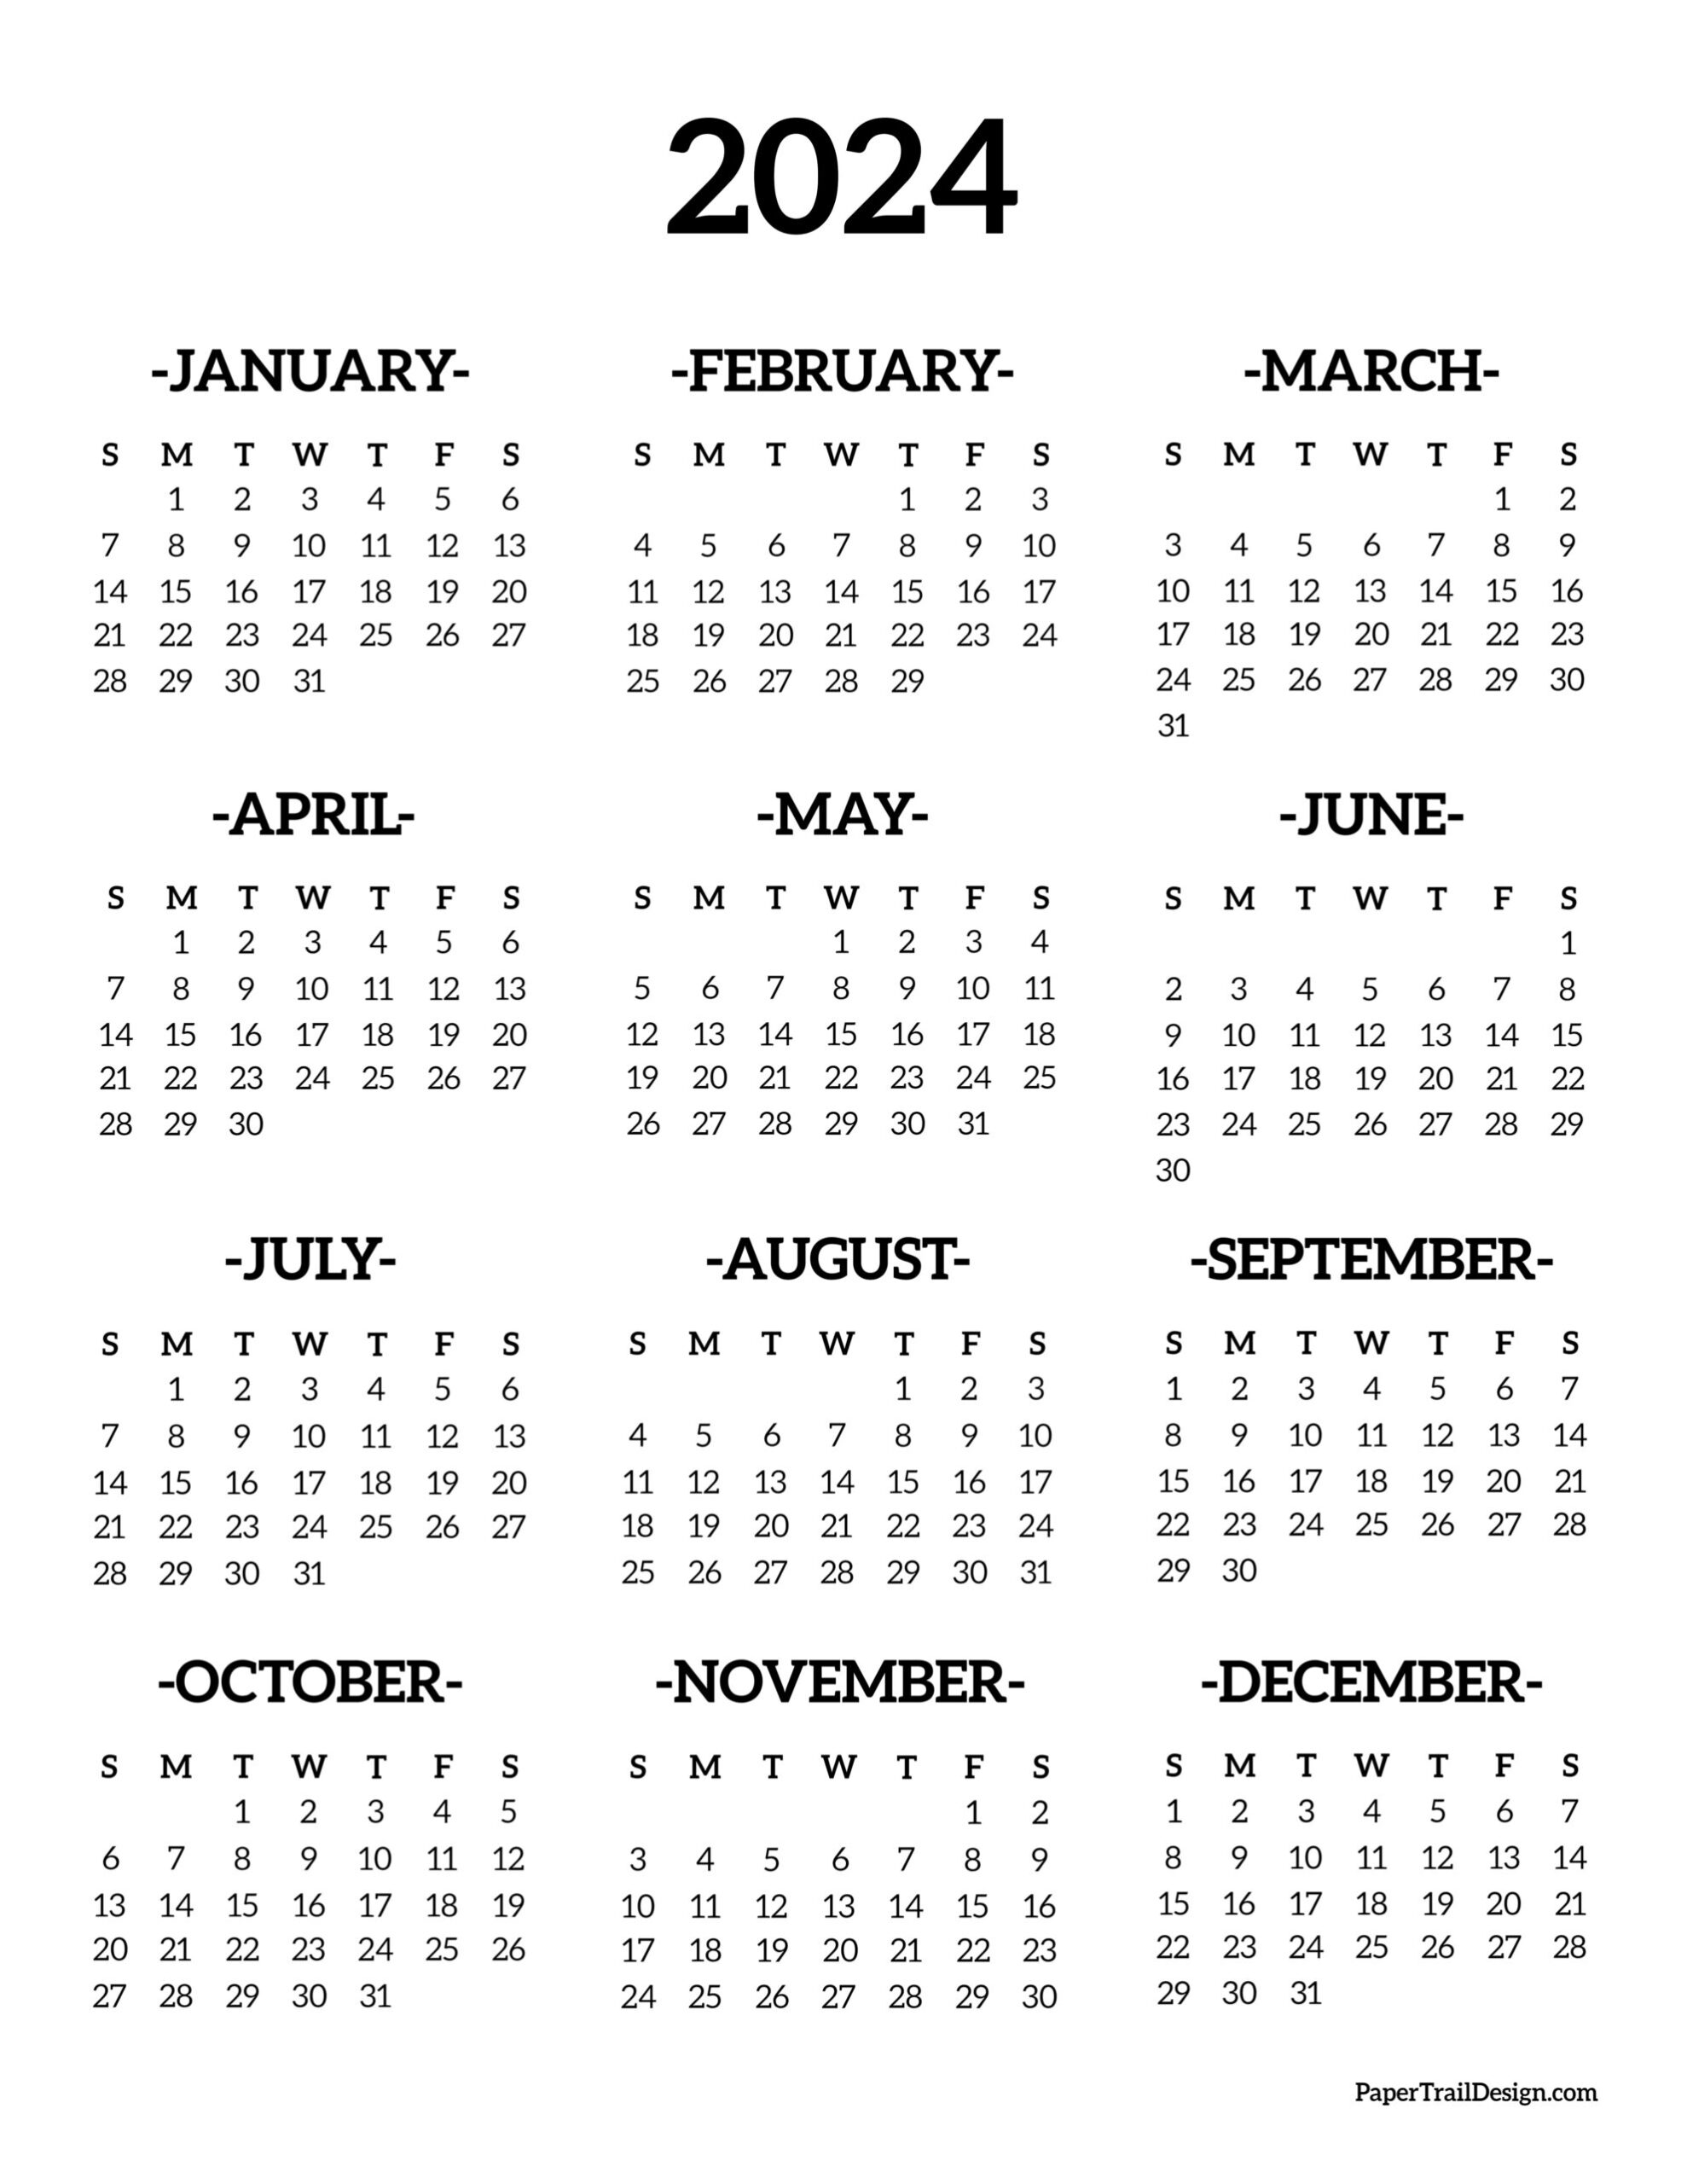 Calendar 2024 Printable One Page - Paper Trail Design for 1 Page Printable Calendar 2024